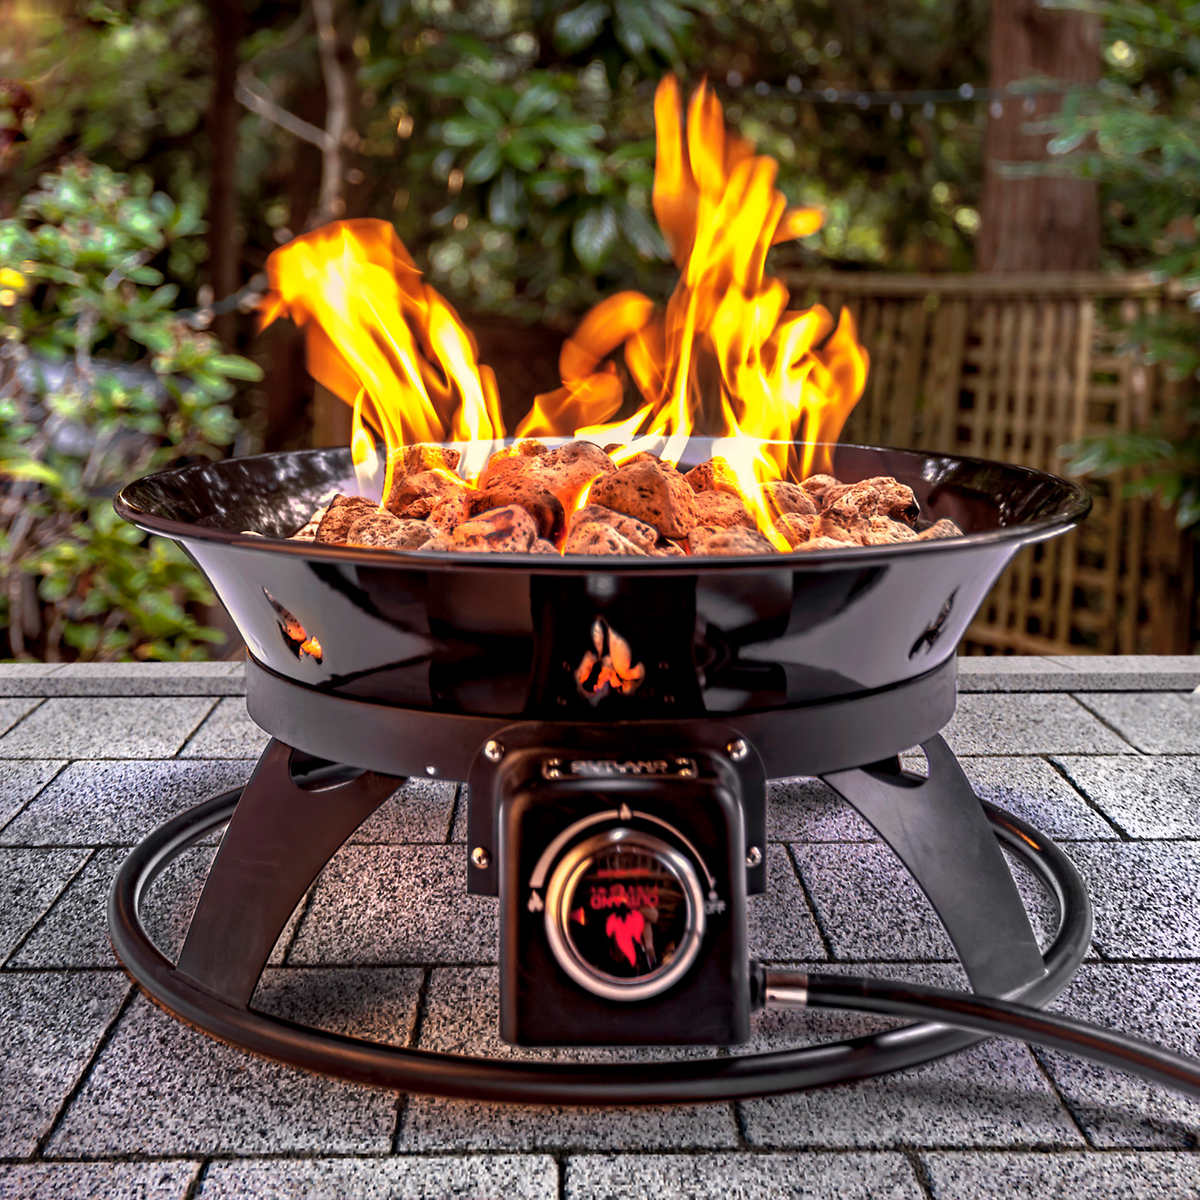 Outland Firebowl Outdoor Firepit Costco, Portable Propane Fire Pit Kit